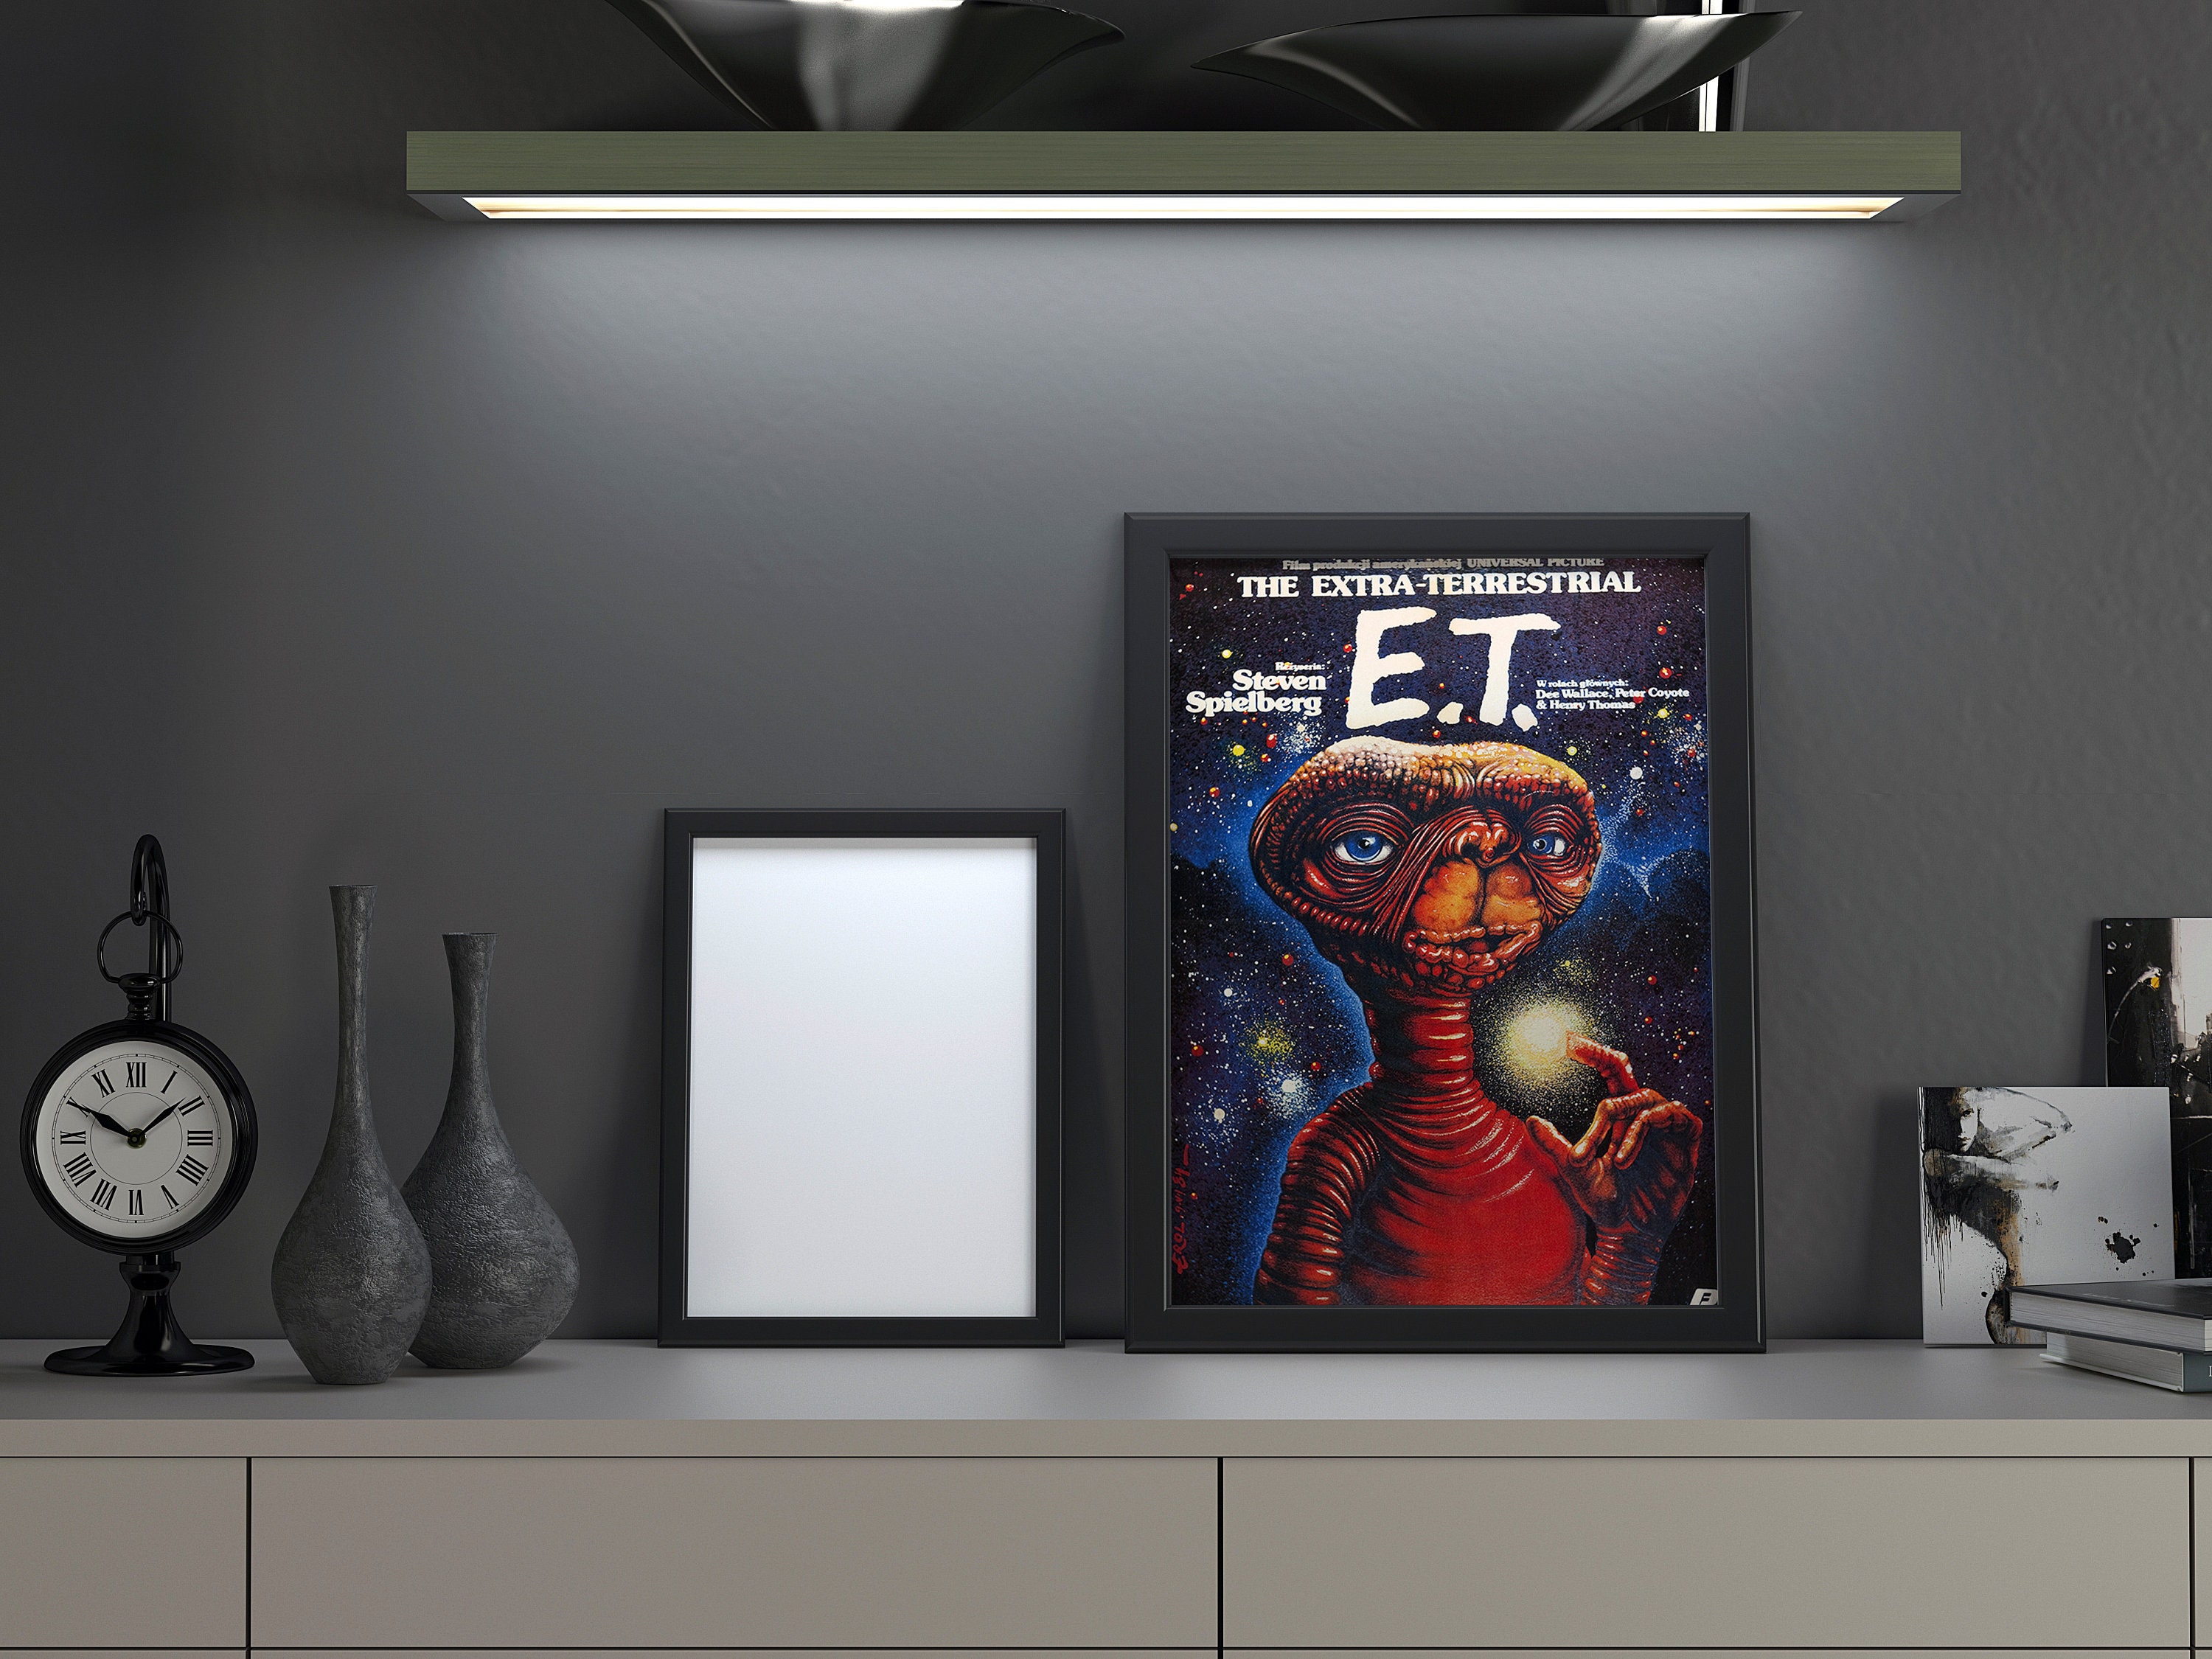 E.T. the Extra Terrestrial Movie Poster